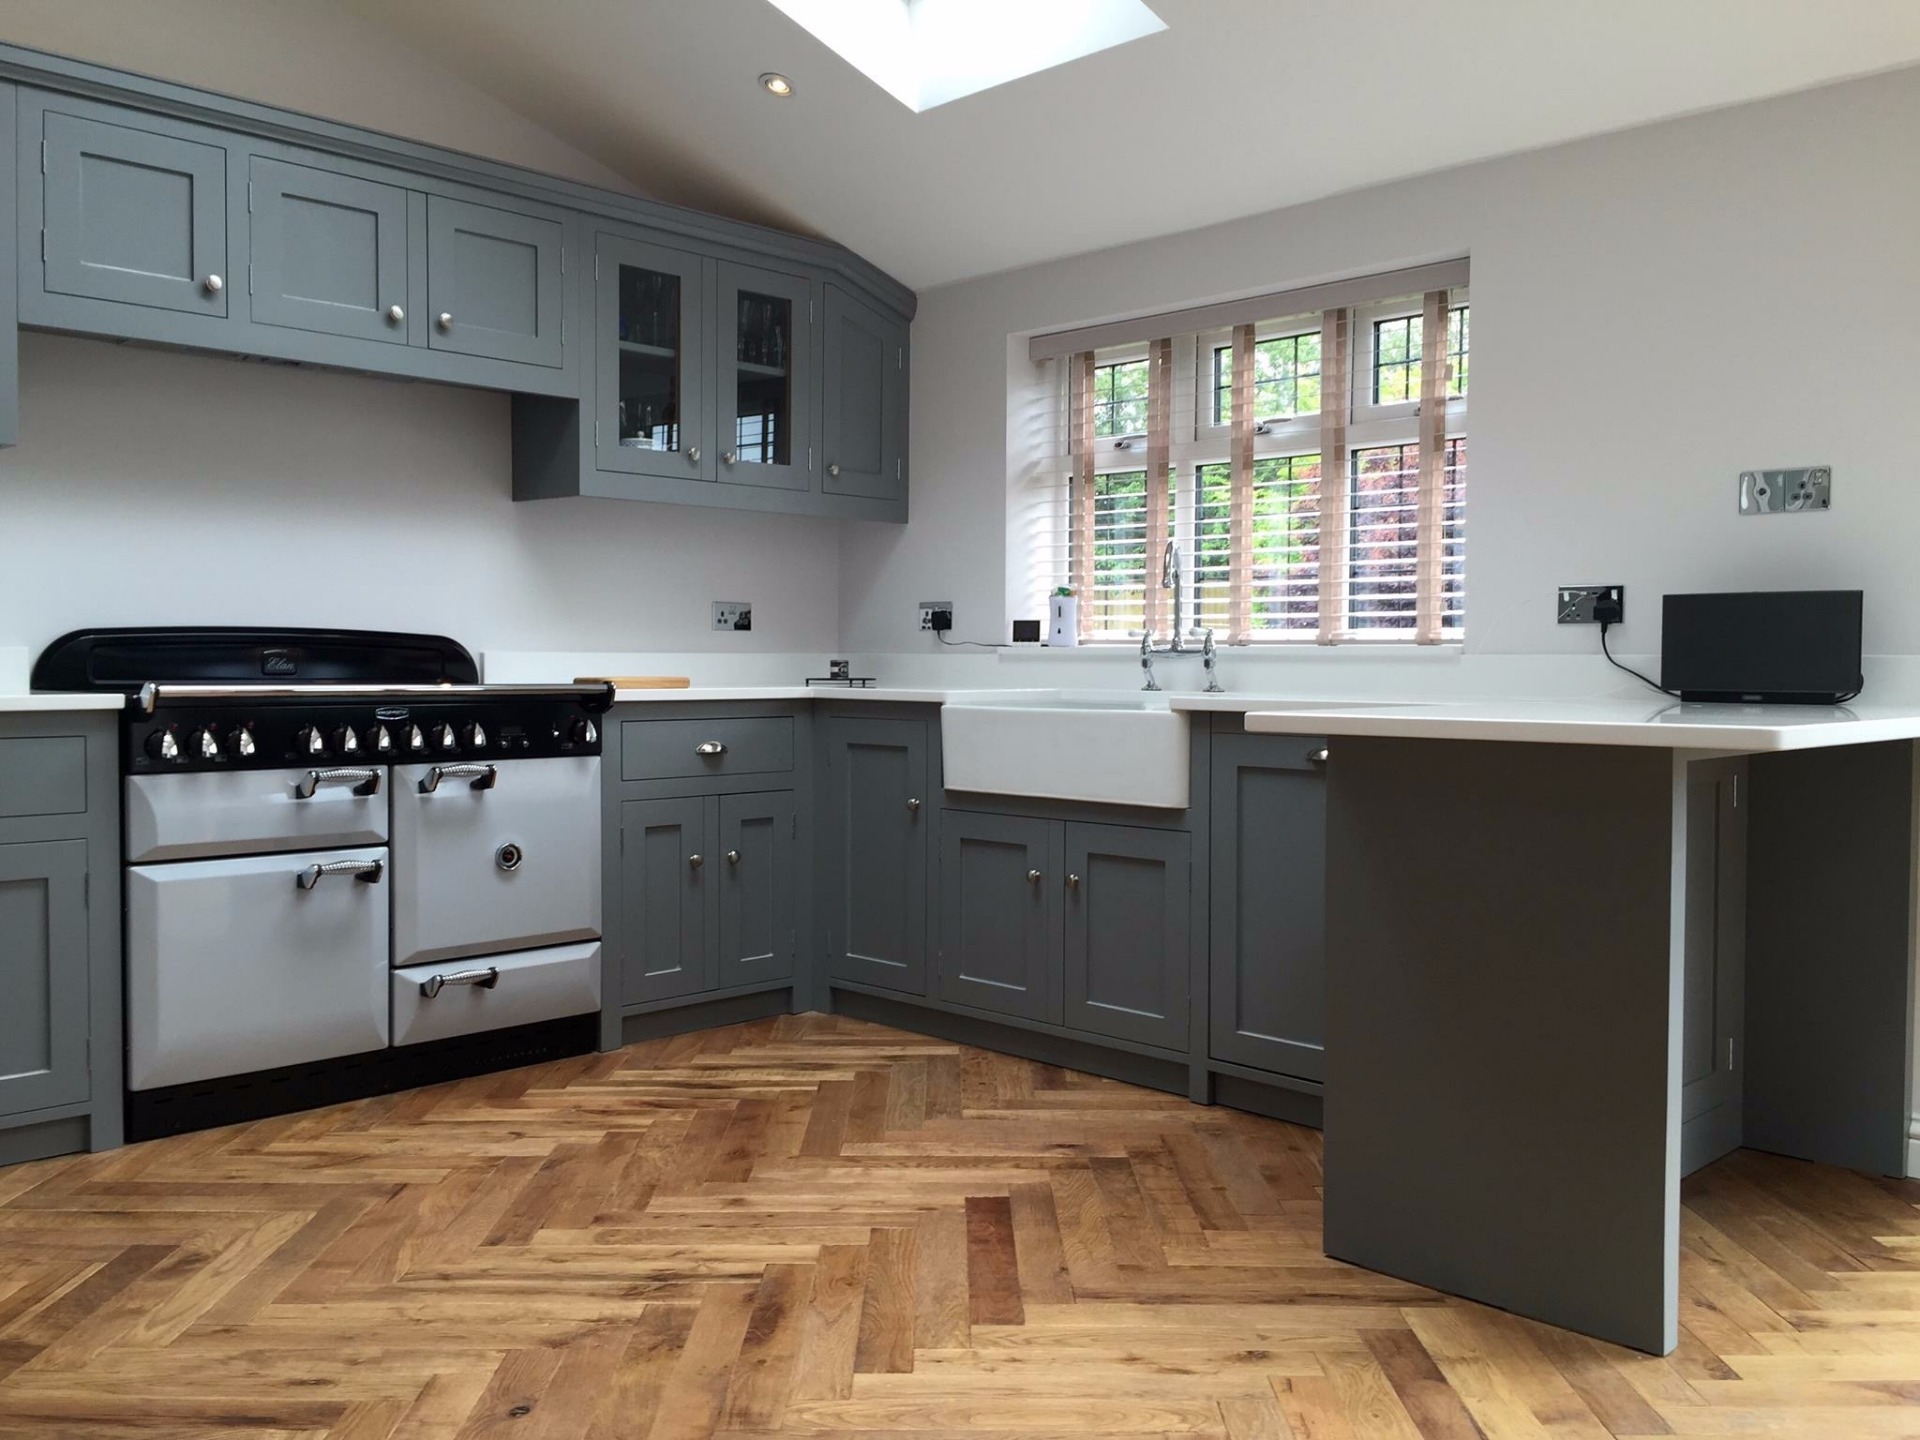 Fully bespoke,shaker style kitchen hand made in solid wood with individually styled features in solid oak.